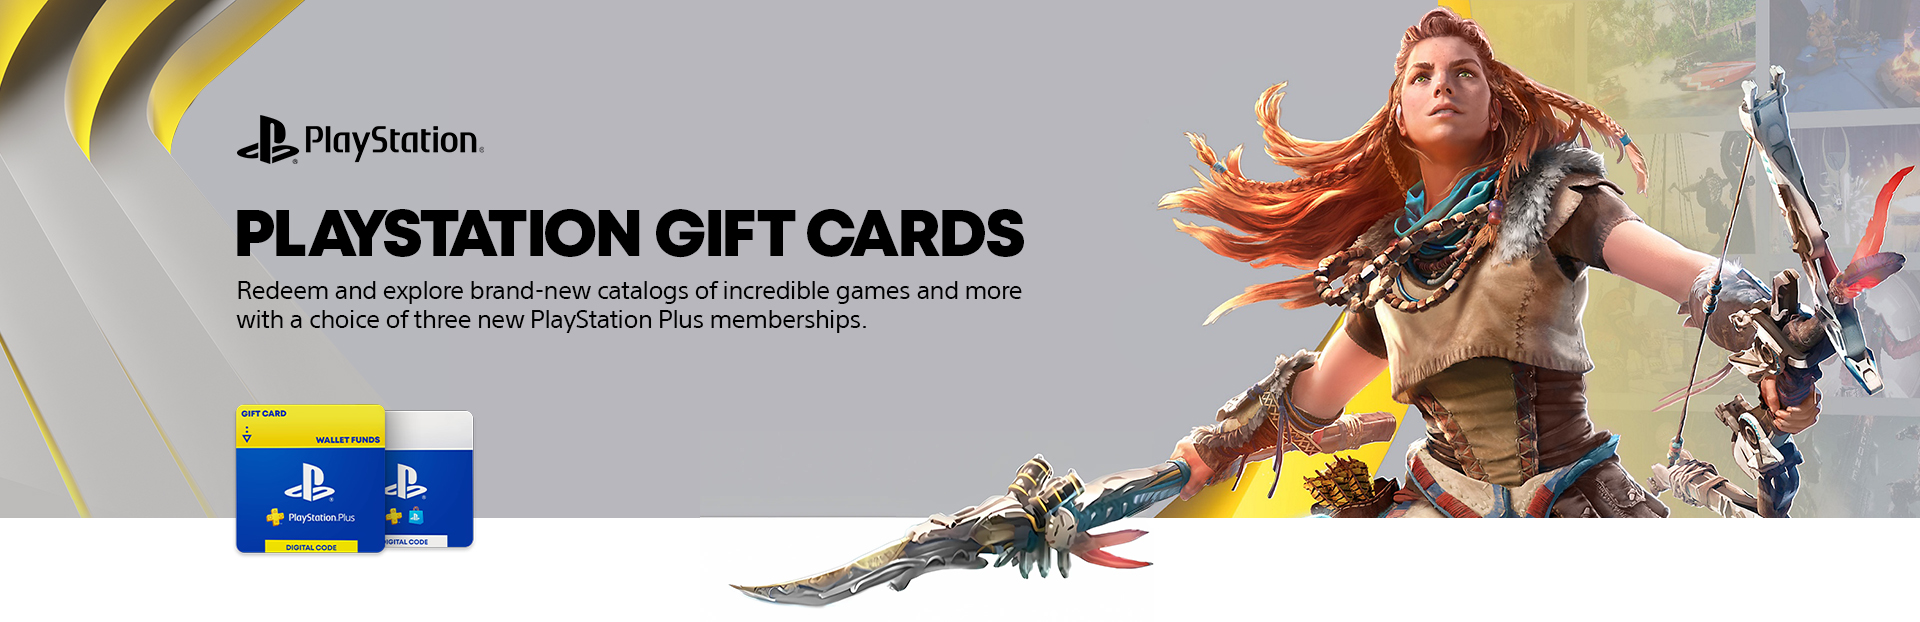 Sony Playstation Giftcards LP 07.14.newbanner